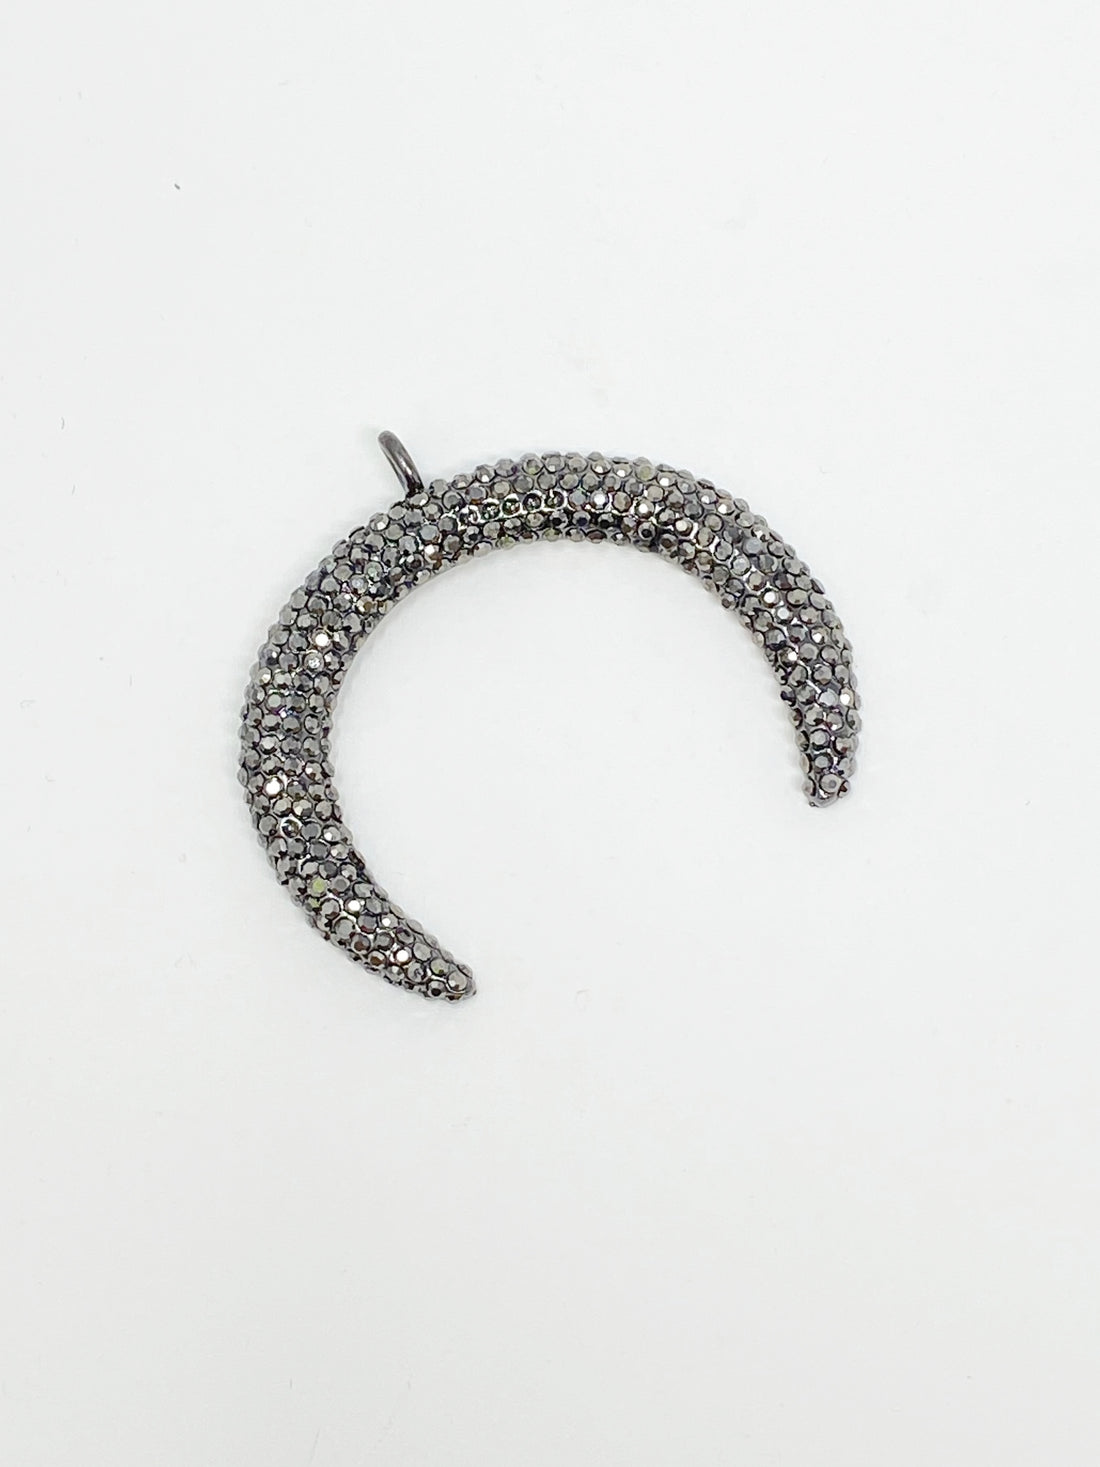 Charming Oversized Pave Moon Charm in Gunmetal